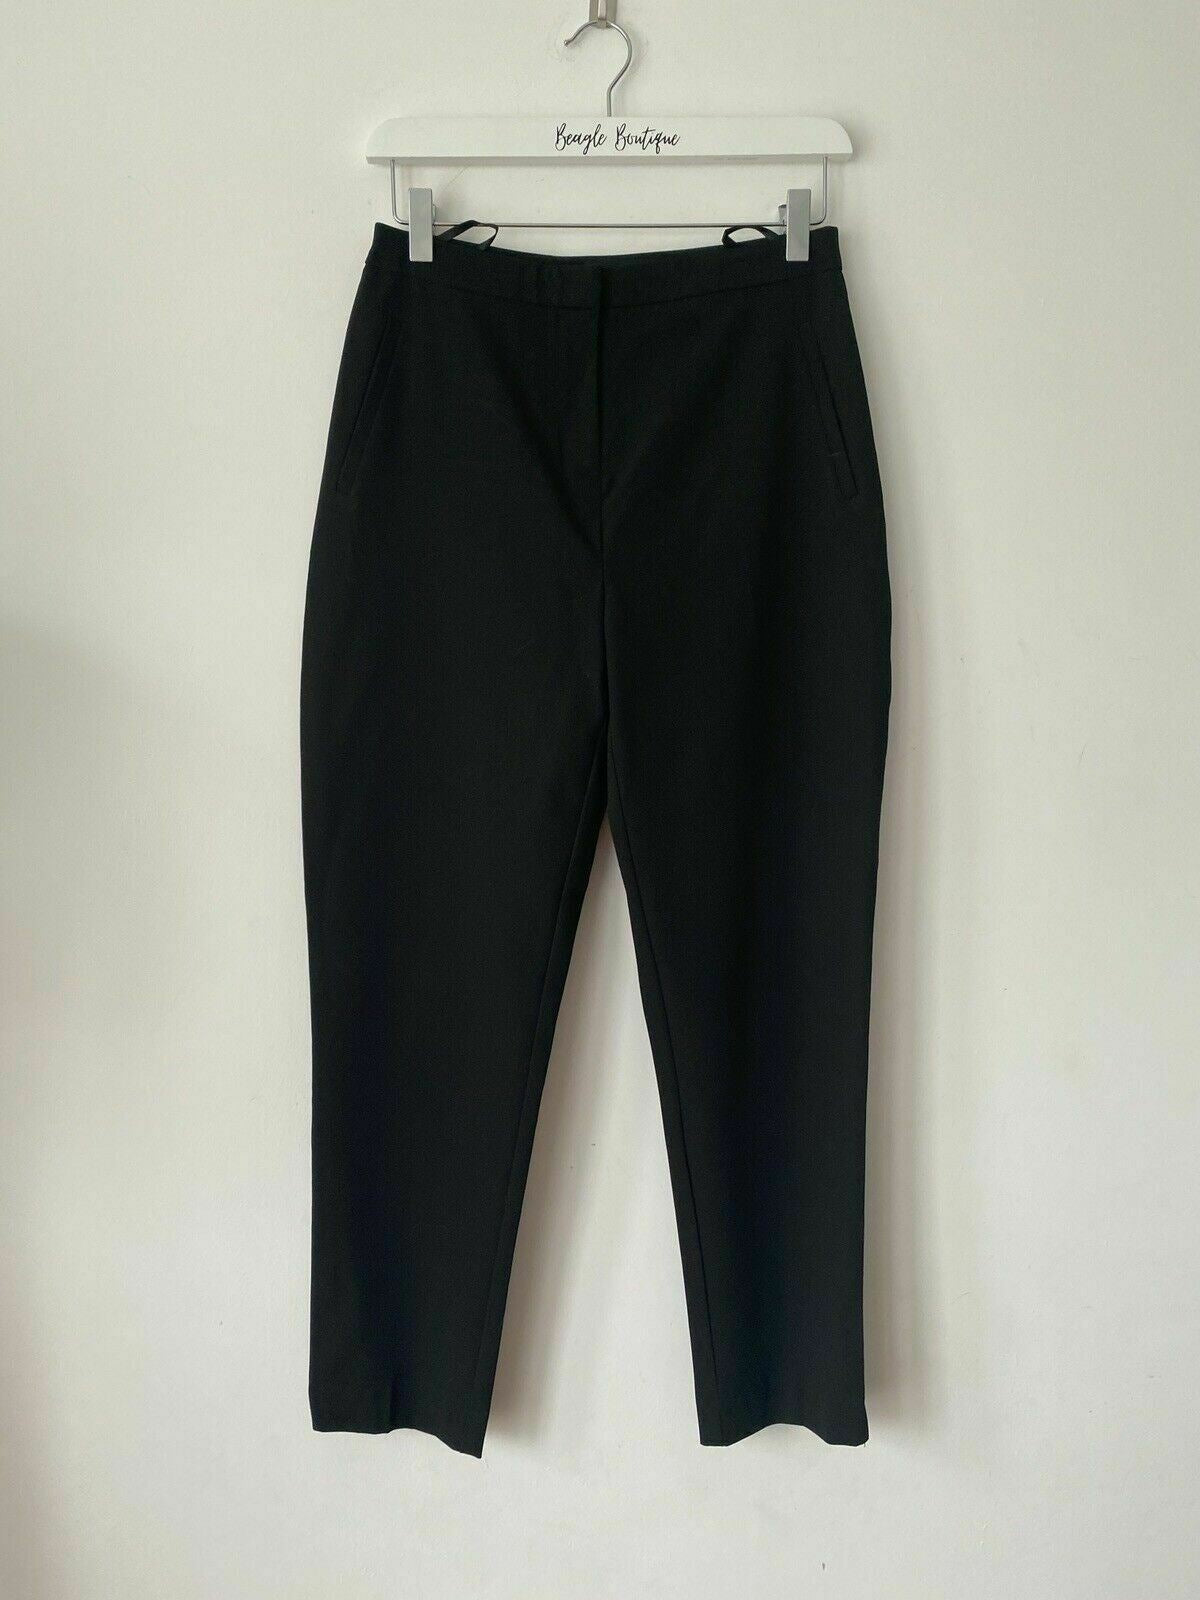 New Look Black Tailored Cropped Trousers Size 8 – beagle boutique